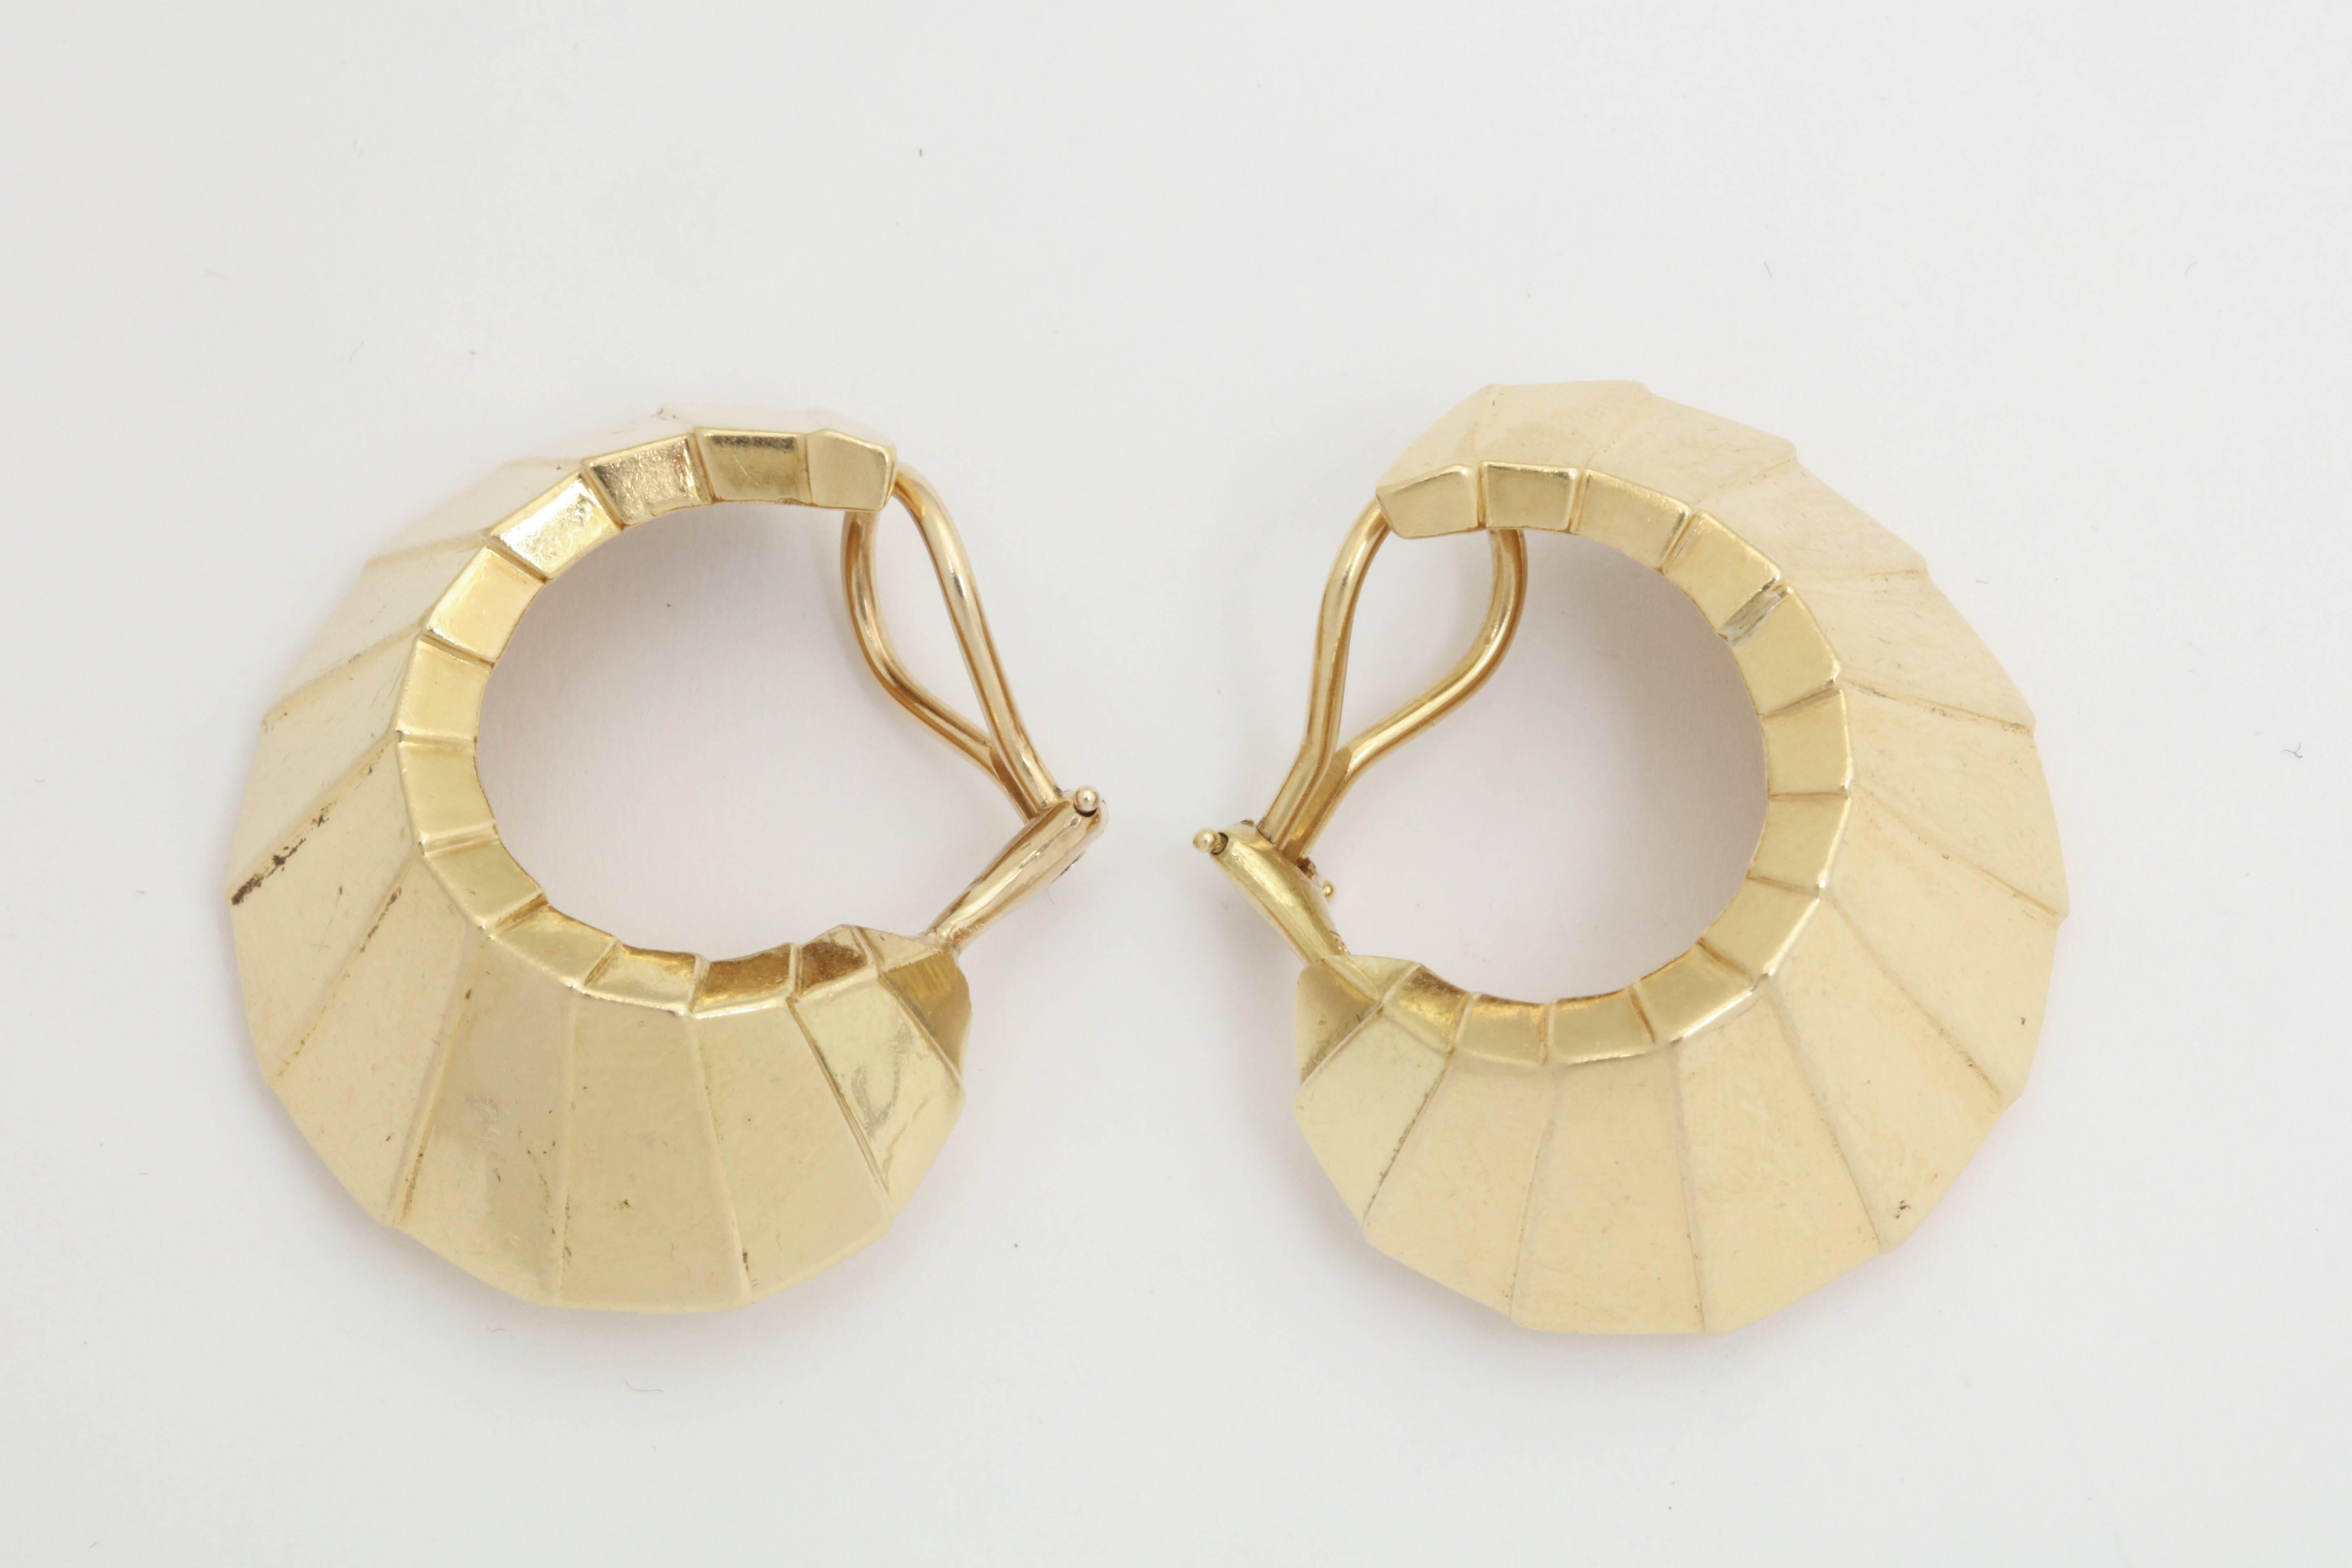 One Pair Of Ladies 18kt Yellow Gold Flared Out Fan shaped Design Earrins Consisting Of thirty Gold Panels For A Optical Illusion Effect Of Mirrors Being Worn.Omega Backs Made In 14kt Yellow Gold For Extra sturdiness,. NOTE: Earrings May Be Worn